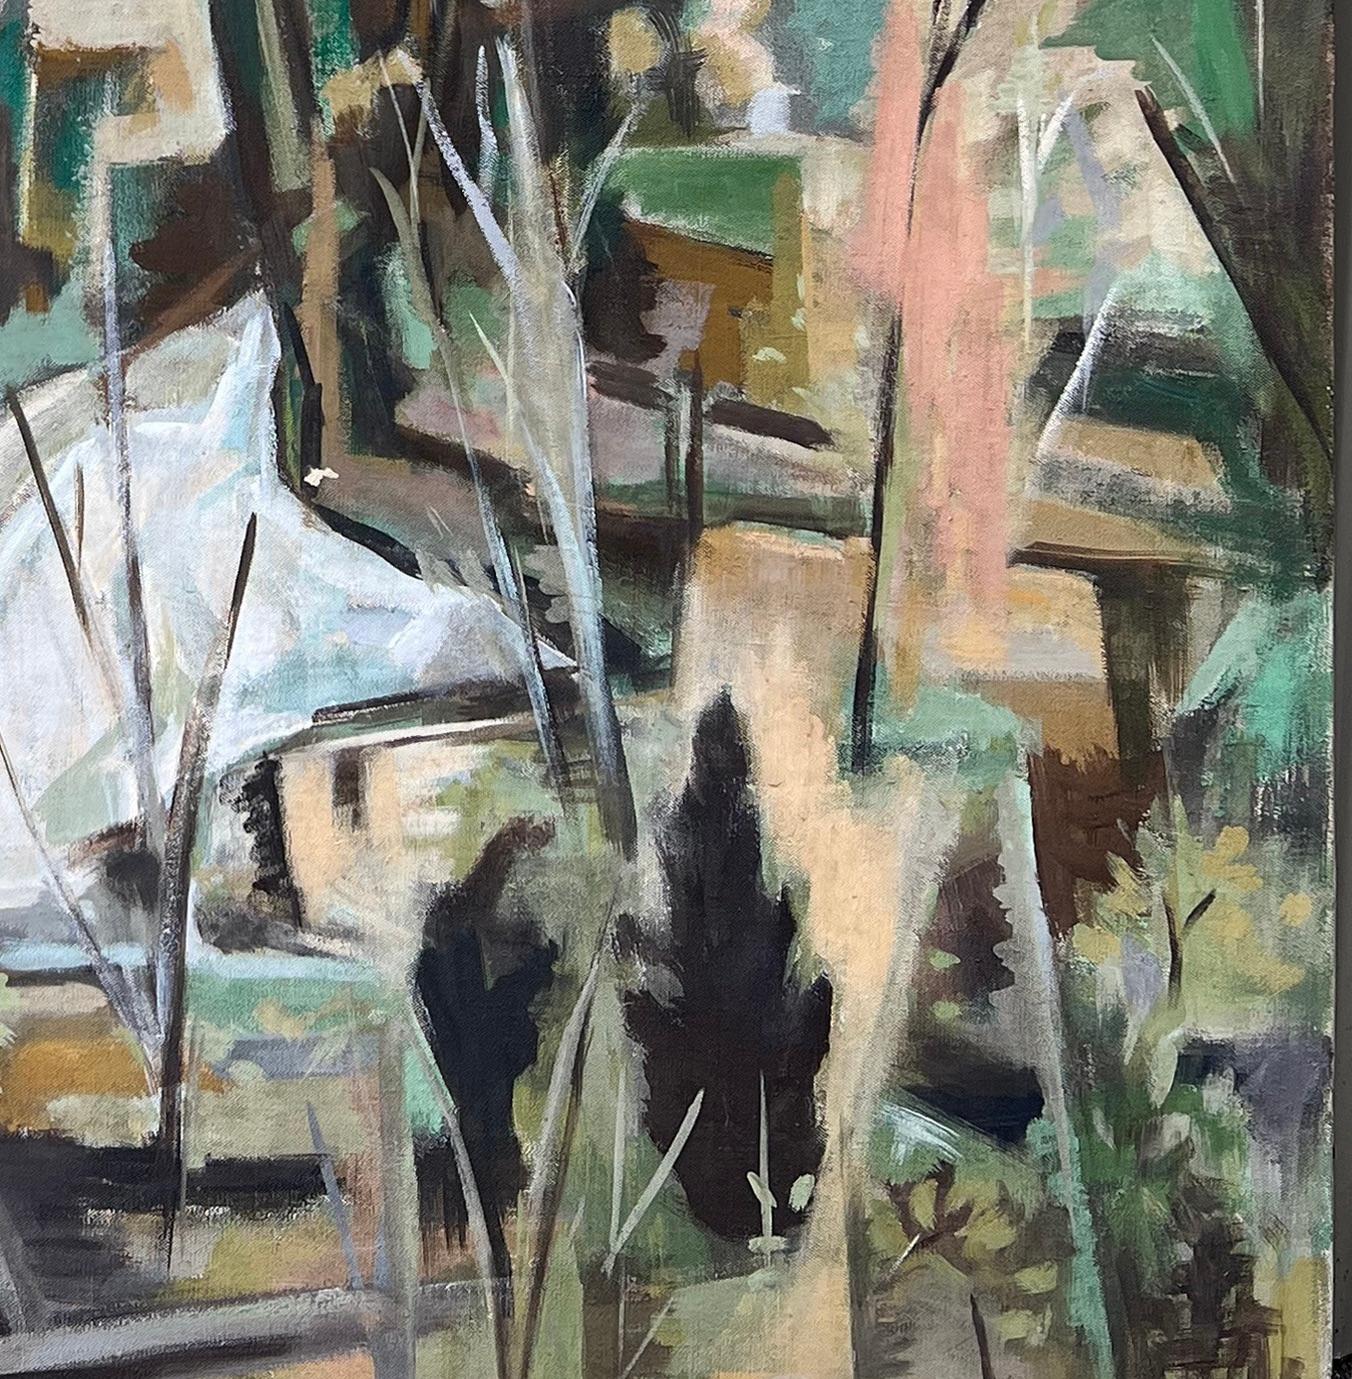 Waterfall Bearsville NY Landscape Social Realism Mid 20th Century Modern Cubism - Painting by Georgina Klitgaard